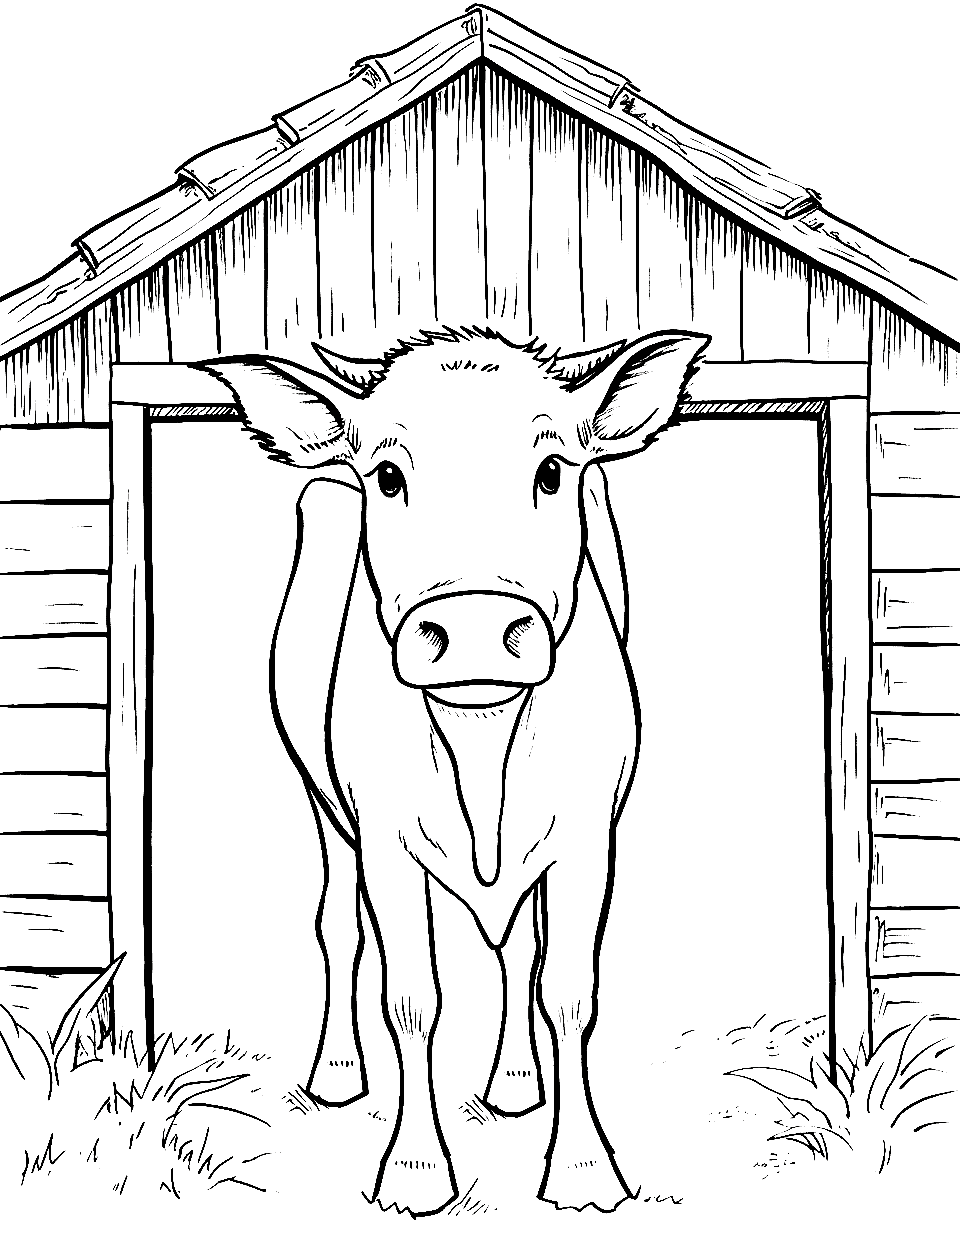 Happy Cowshed Days Coloring Page - A single cow gleefully emerging from a simple, little cowshed.